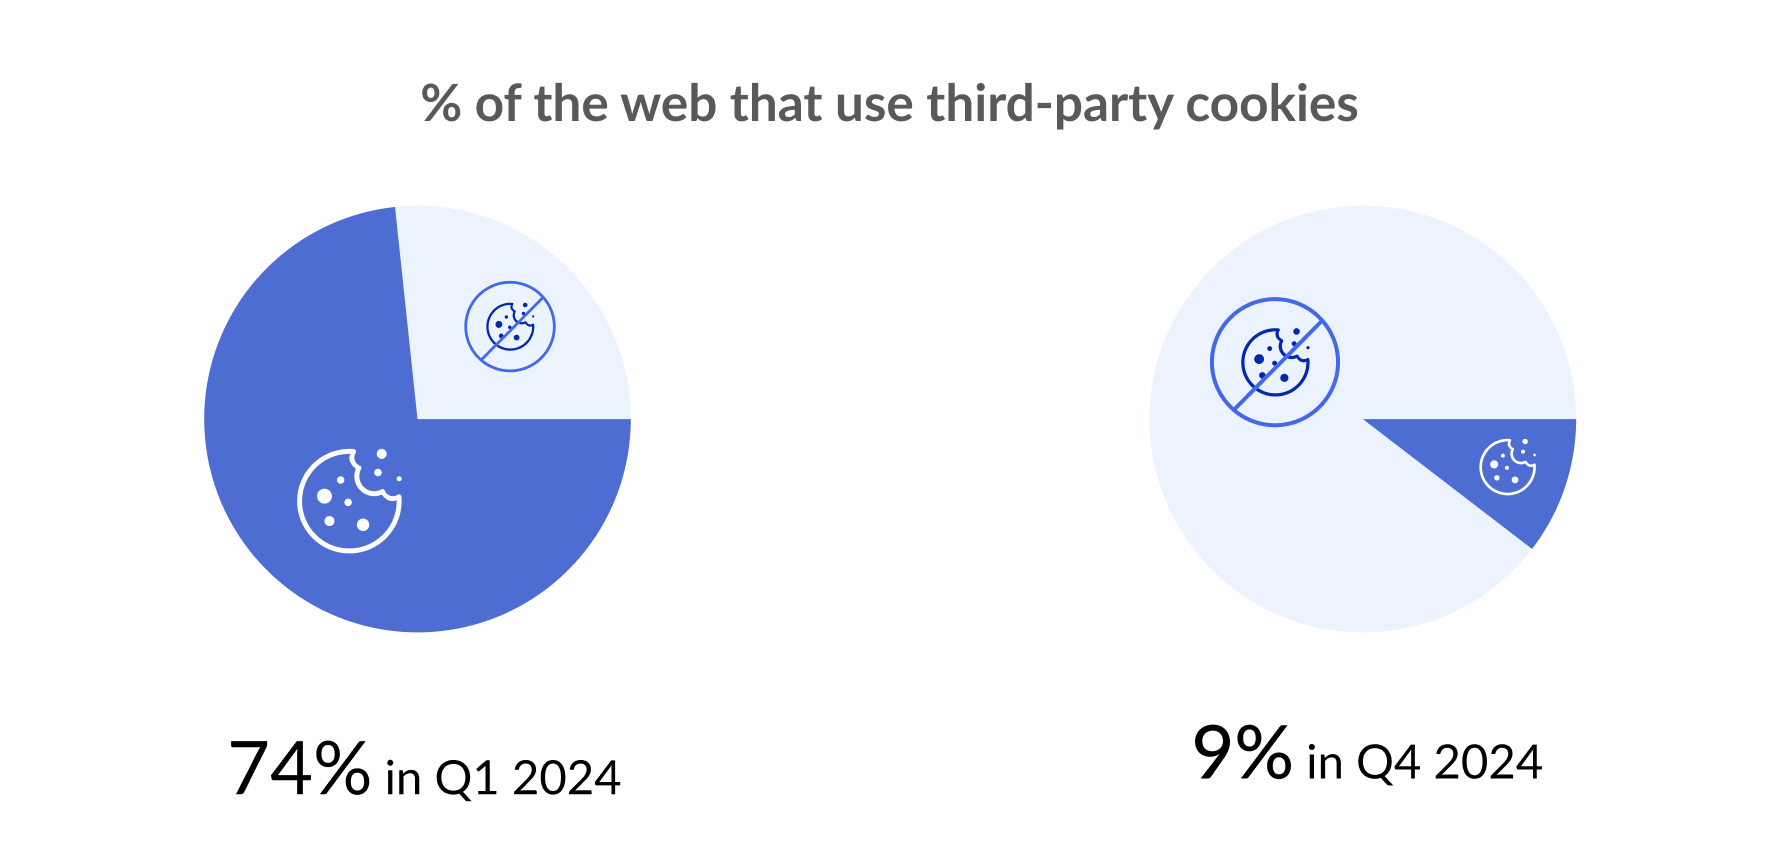 share of the web that use third-party cookies